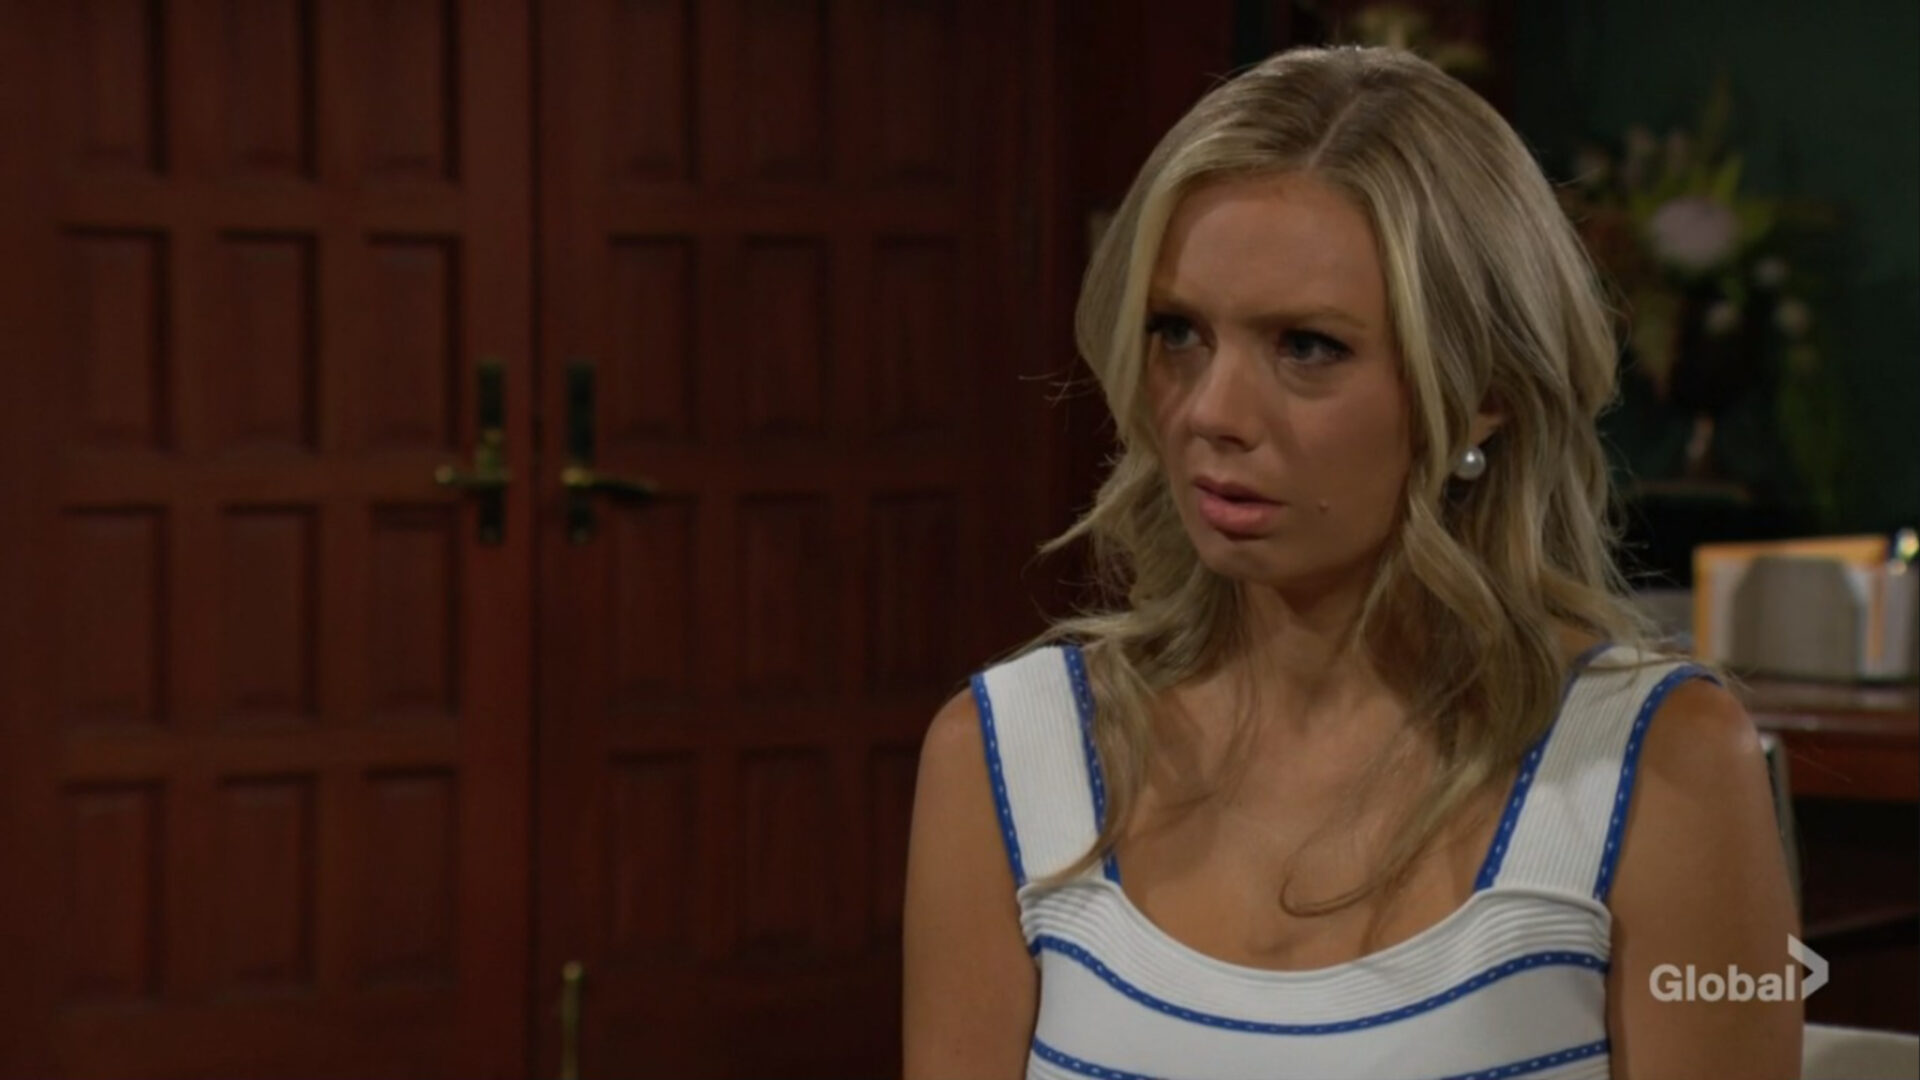 abby learns how locke left young restless